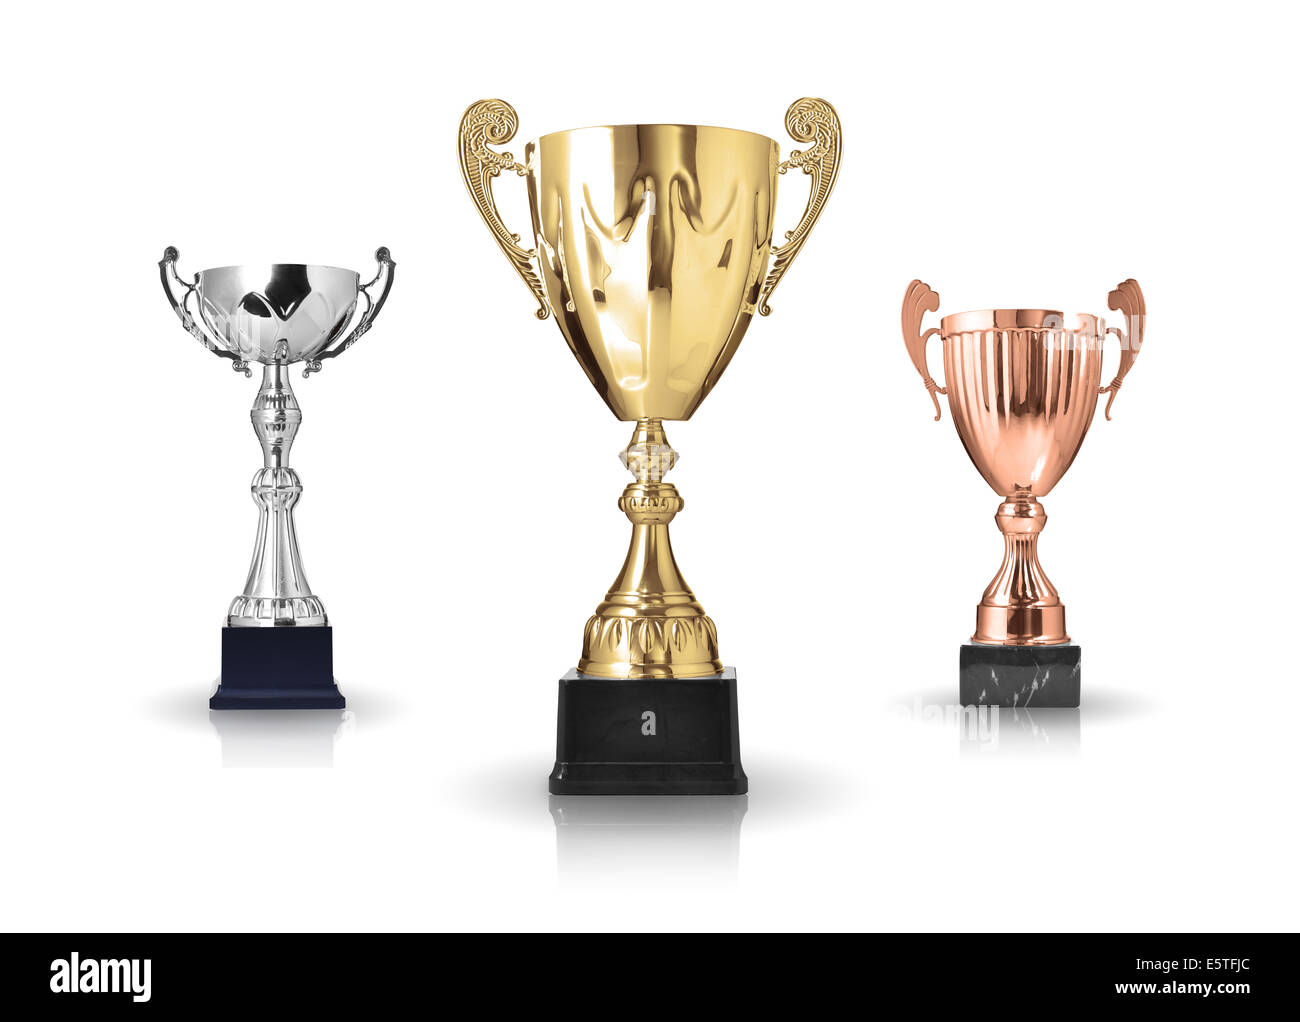 three different kind of trophies. Isolated on white background Stock Photo